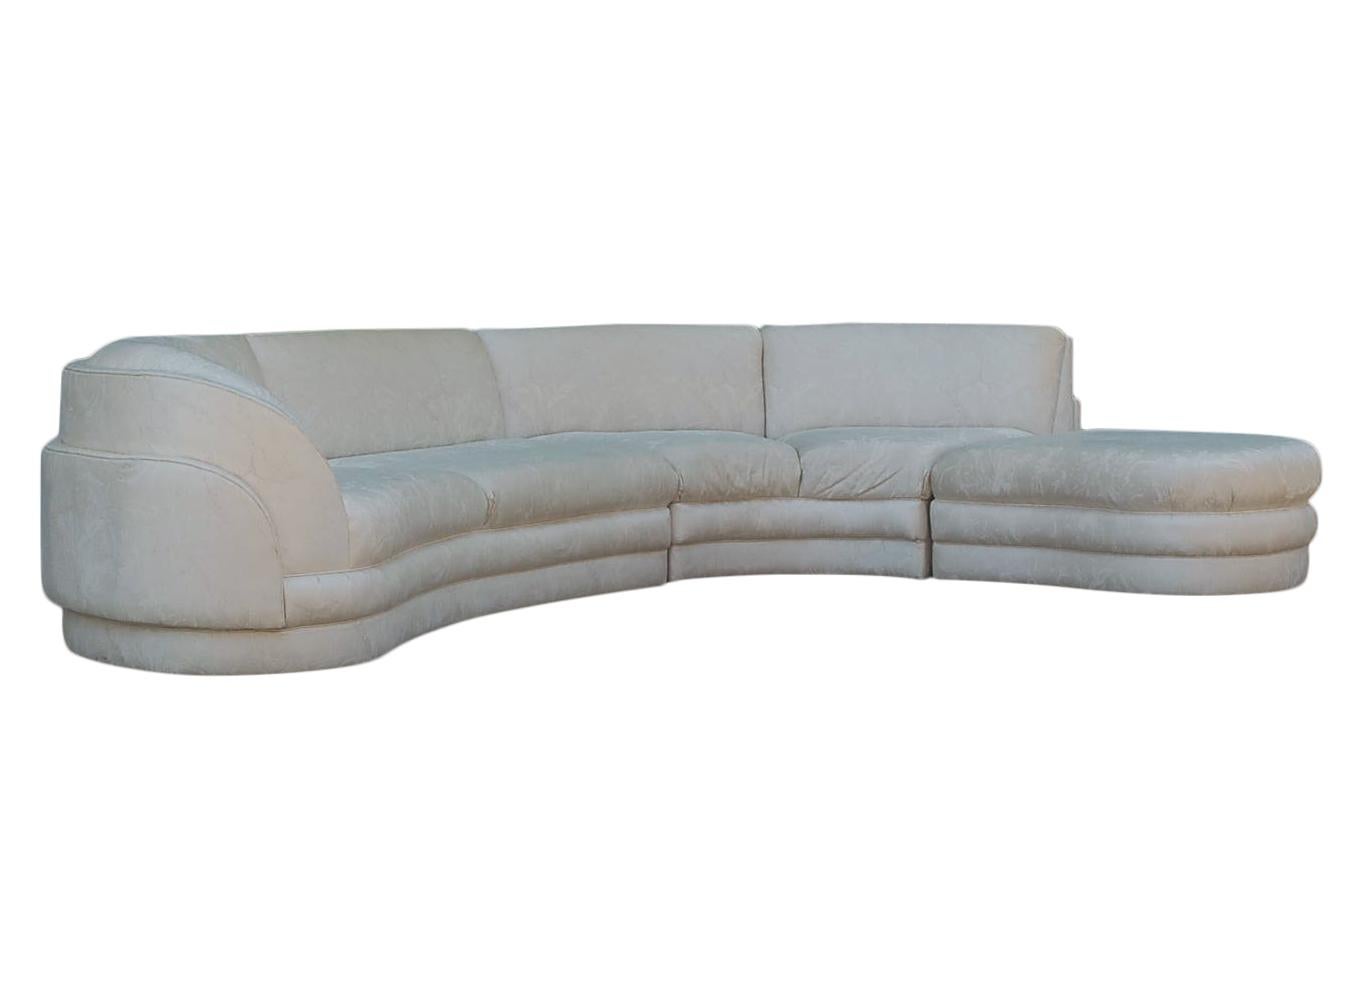 A beautifully designed vintage sofa, circa 1970s. This high quality sectional sofa features a 3-piece design and looks good from every angle. Upholstery is original, it is soiled and needs recovering. Foam and padding are excellent.